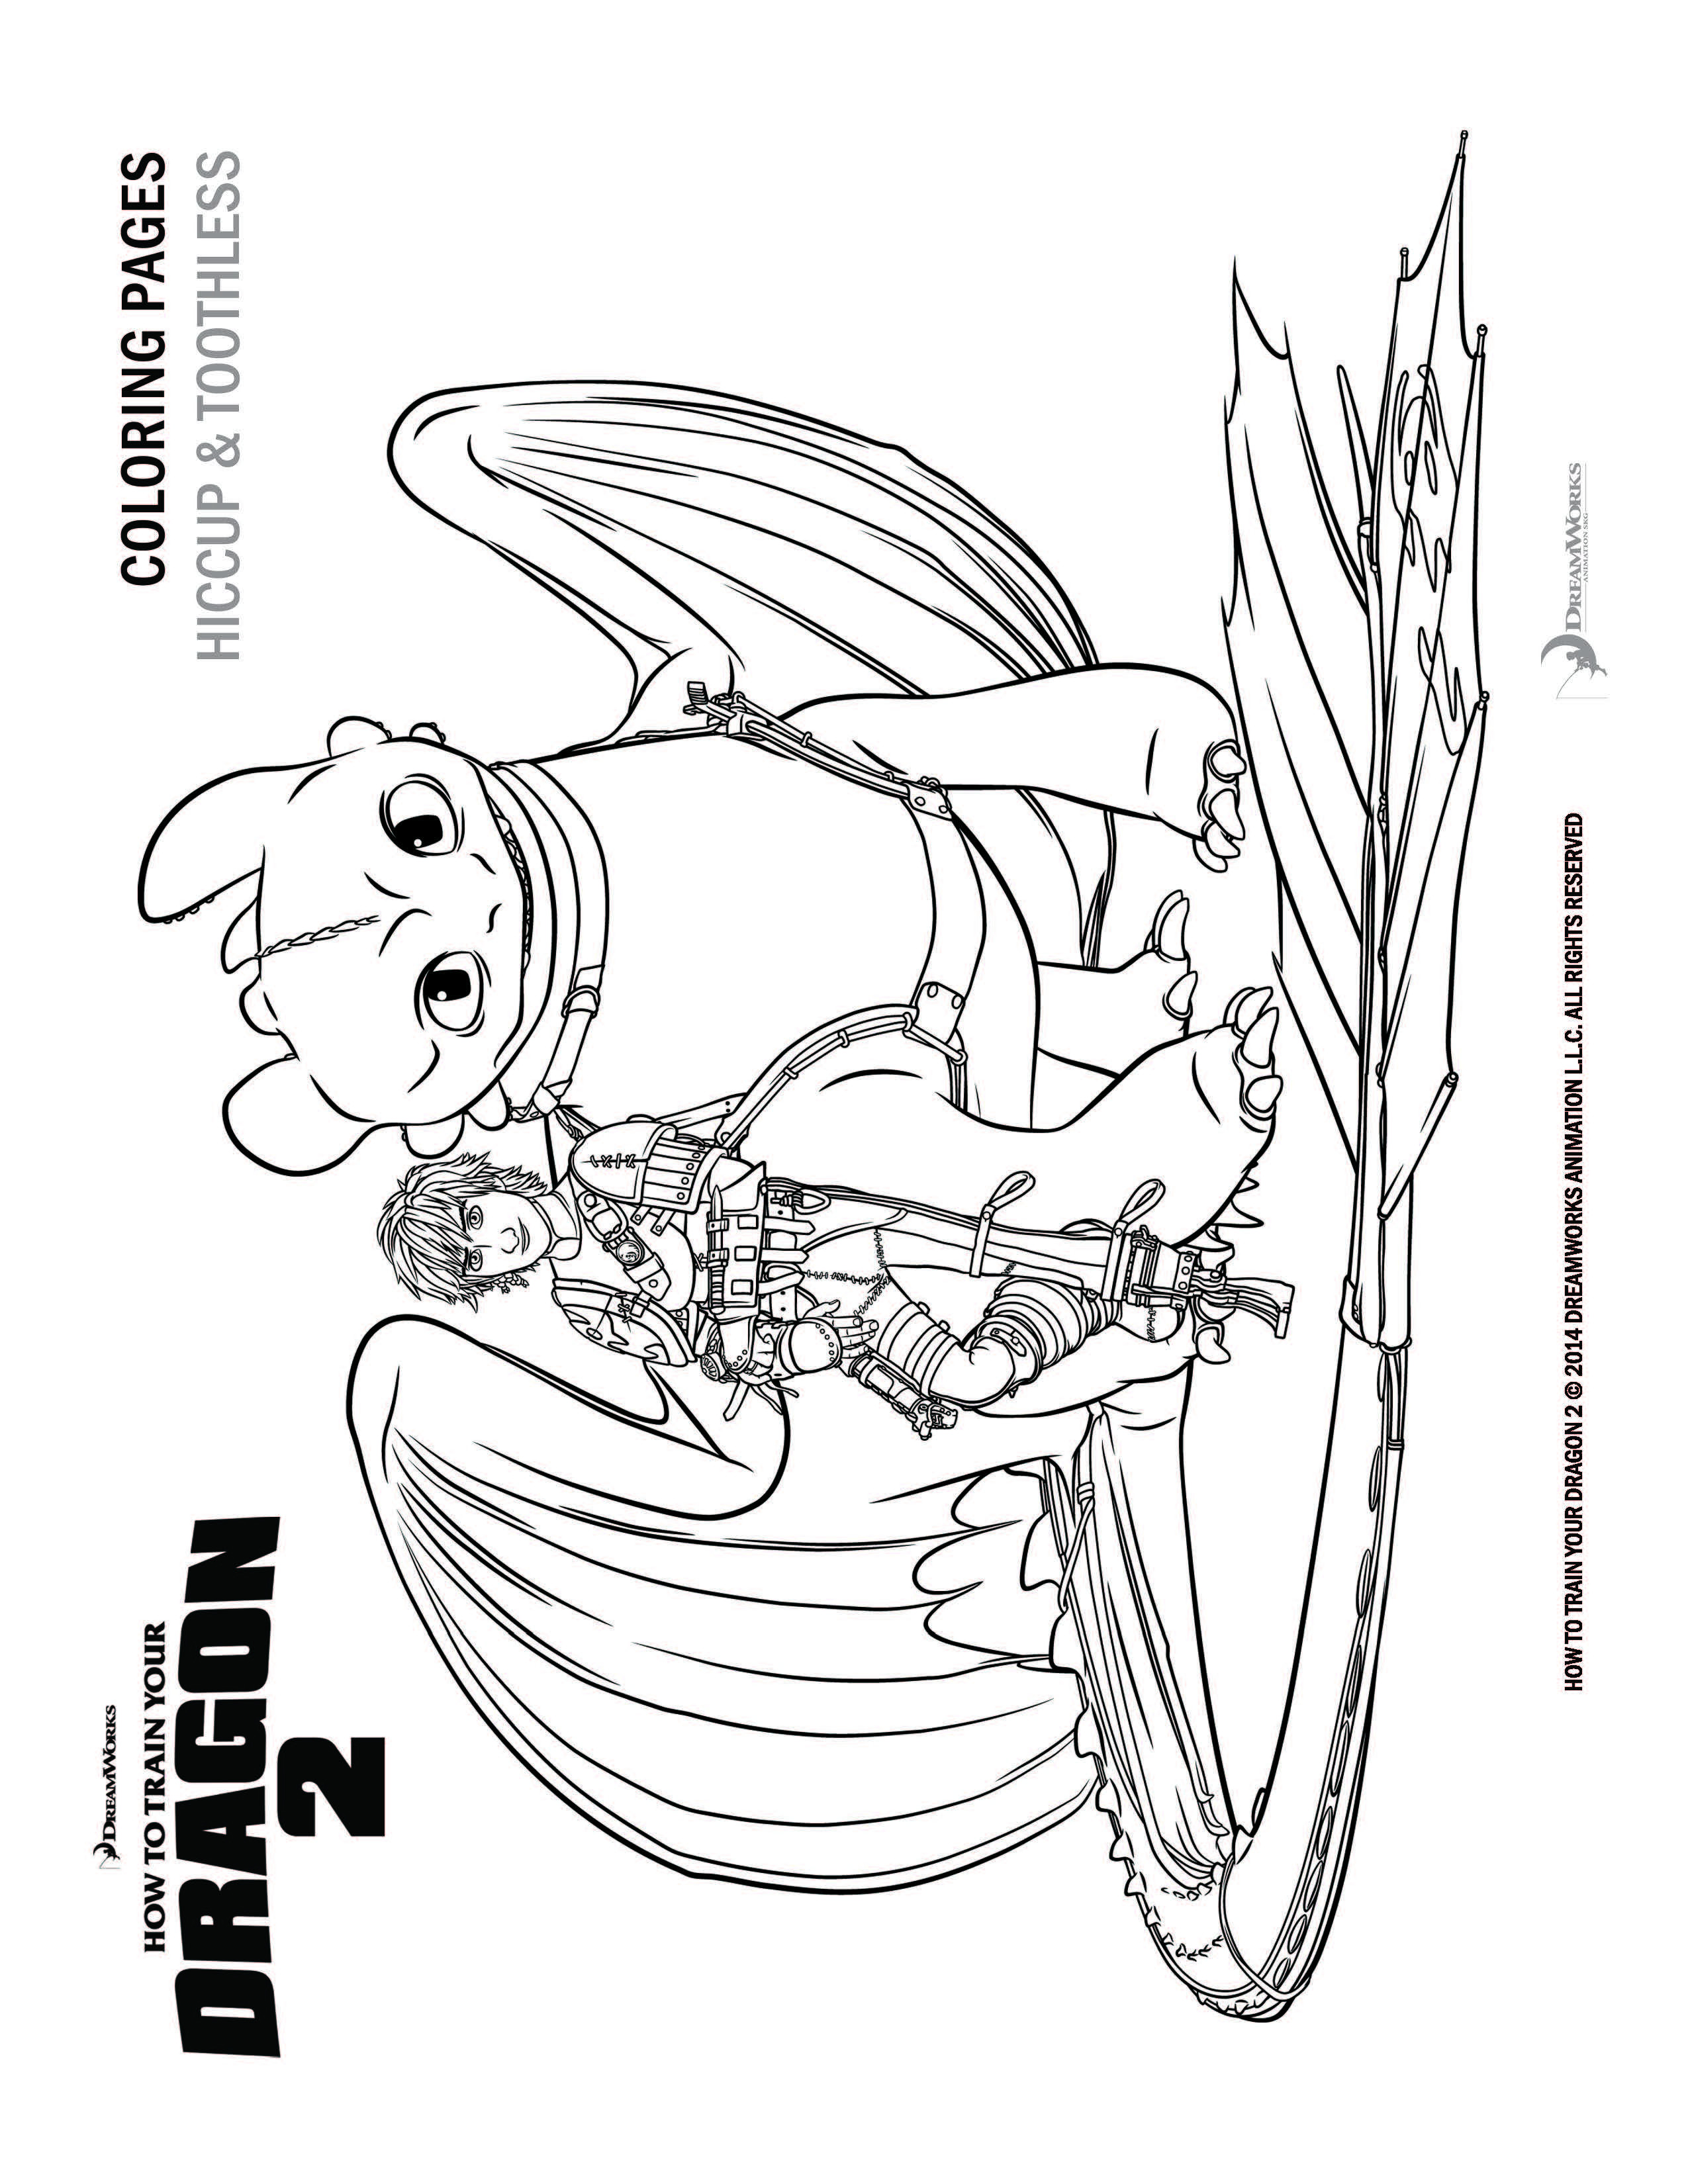 How To Train Your Dragon Coloring Pages
 How to Train Your Dragon 2 coloring pages and activity sheets